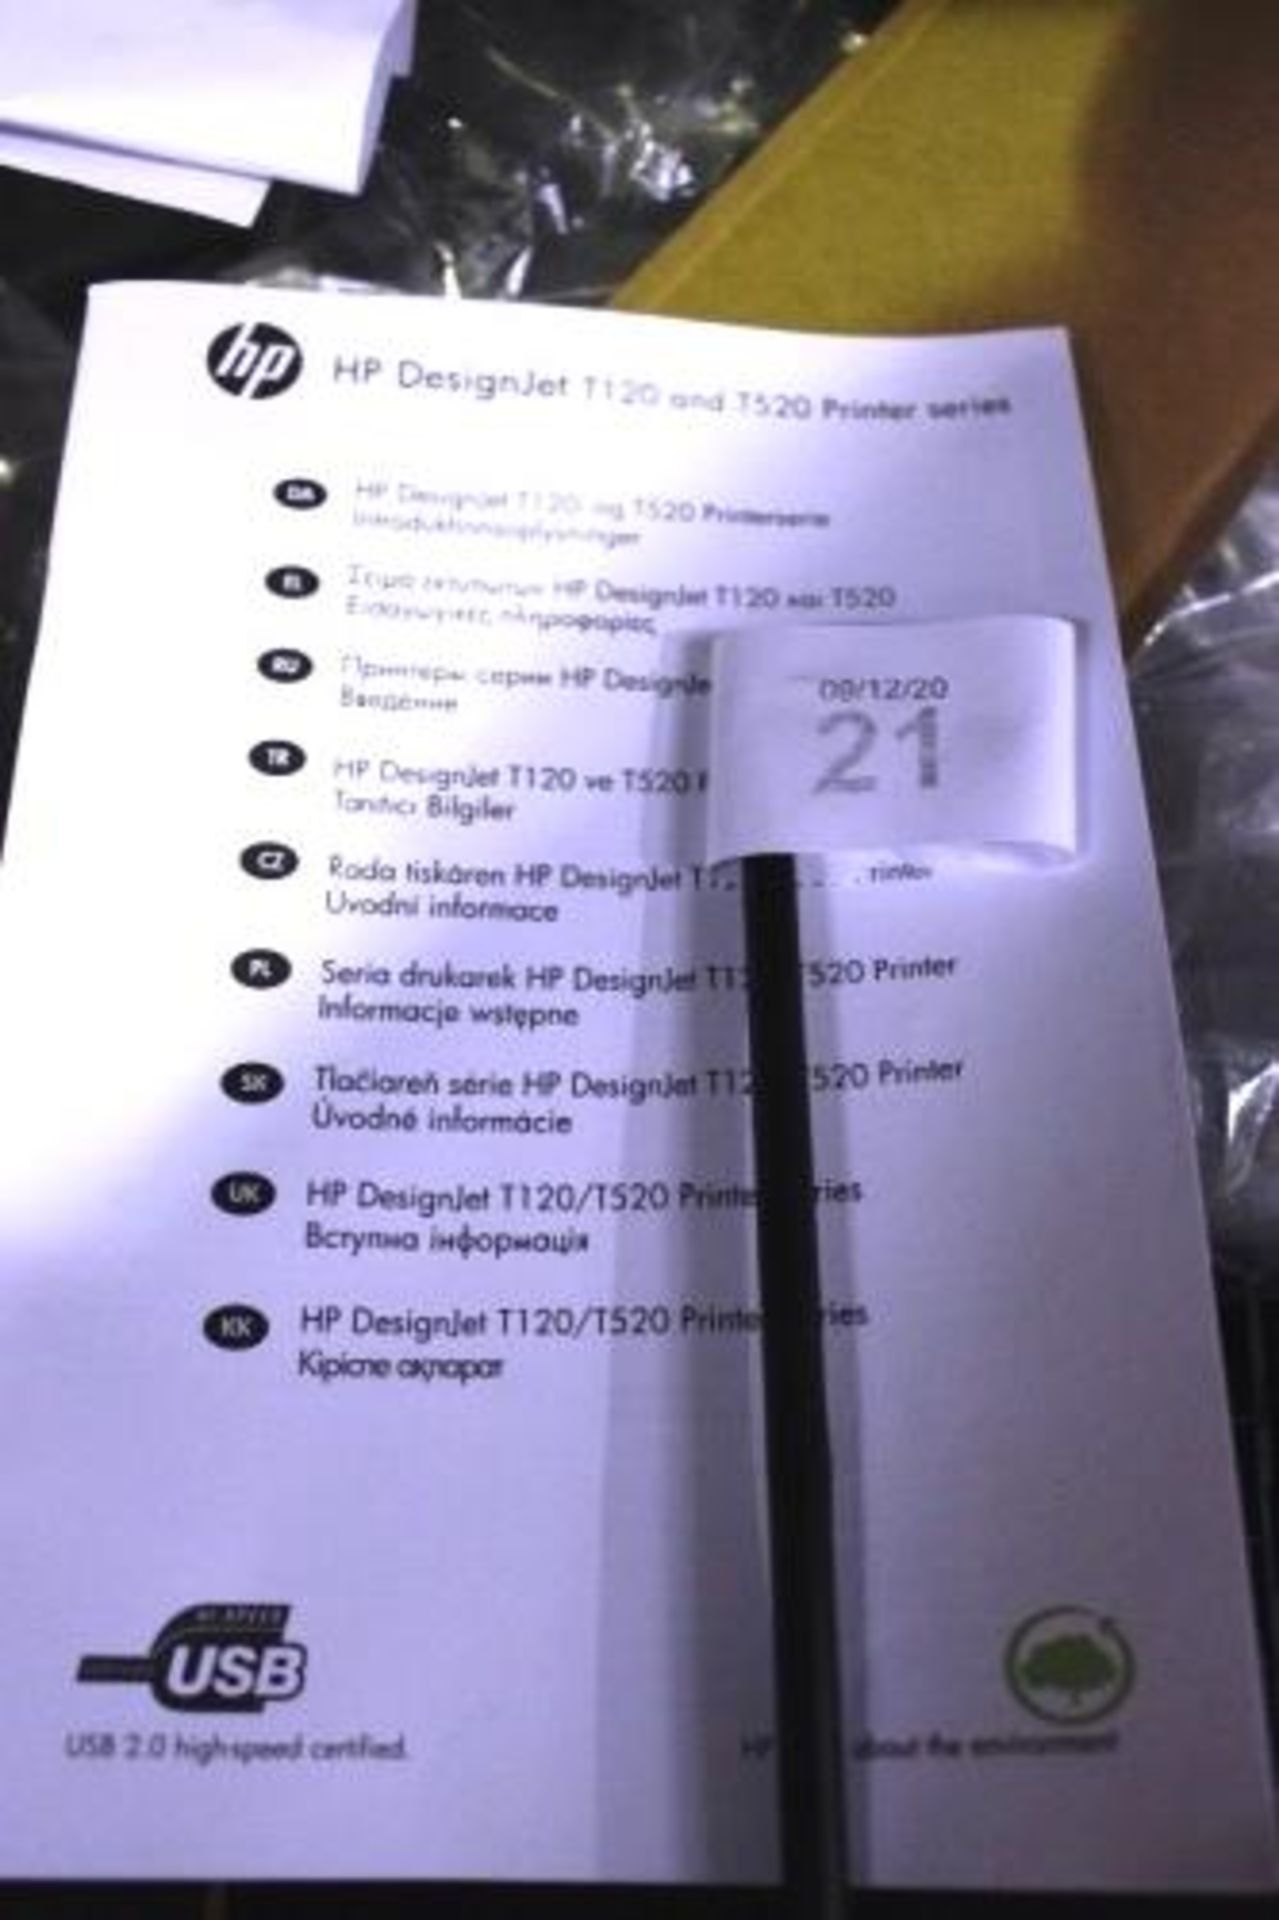 1 x HP Design Jet T520 24" printer, model CQ890C, total pages printed 4, print head installation - Image 2 of 3